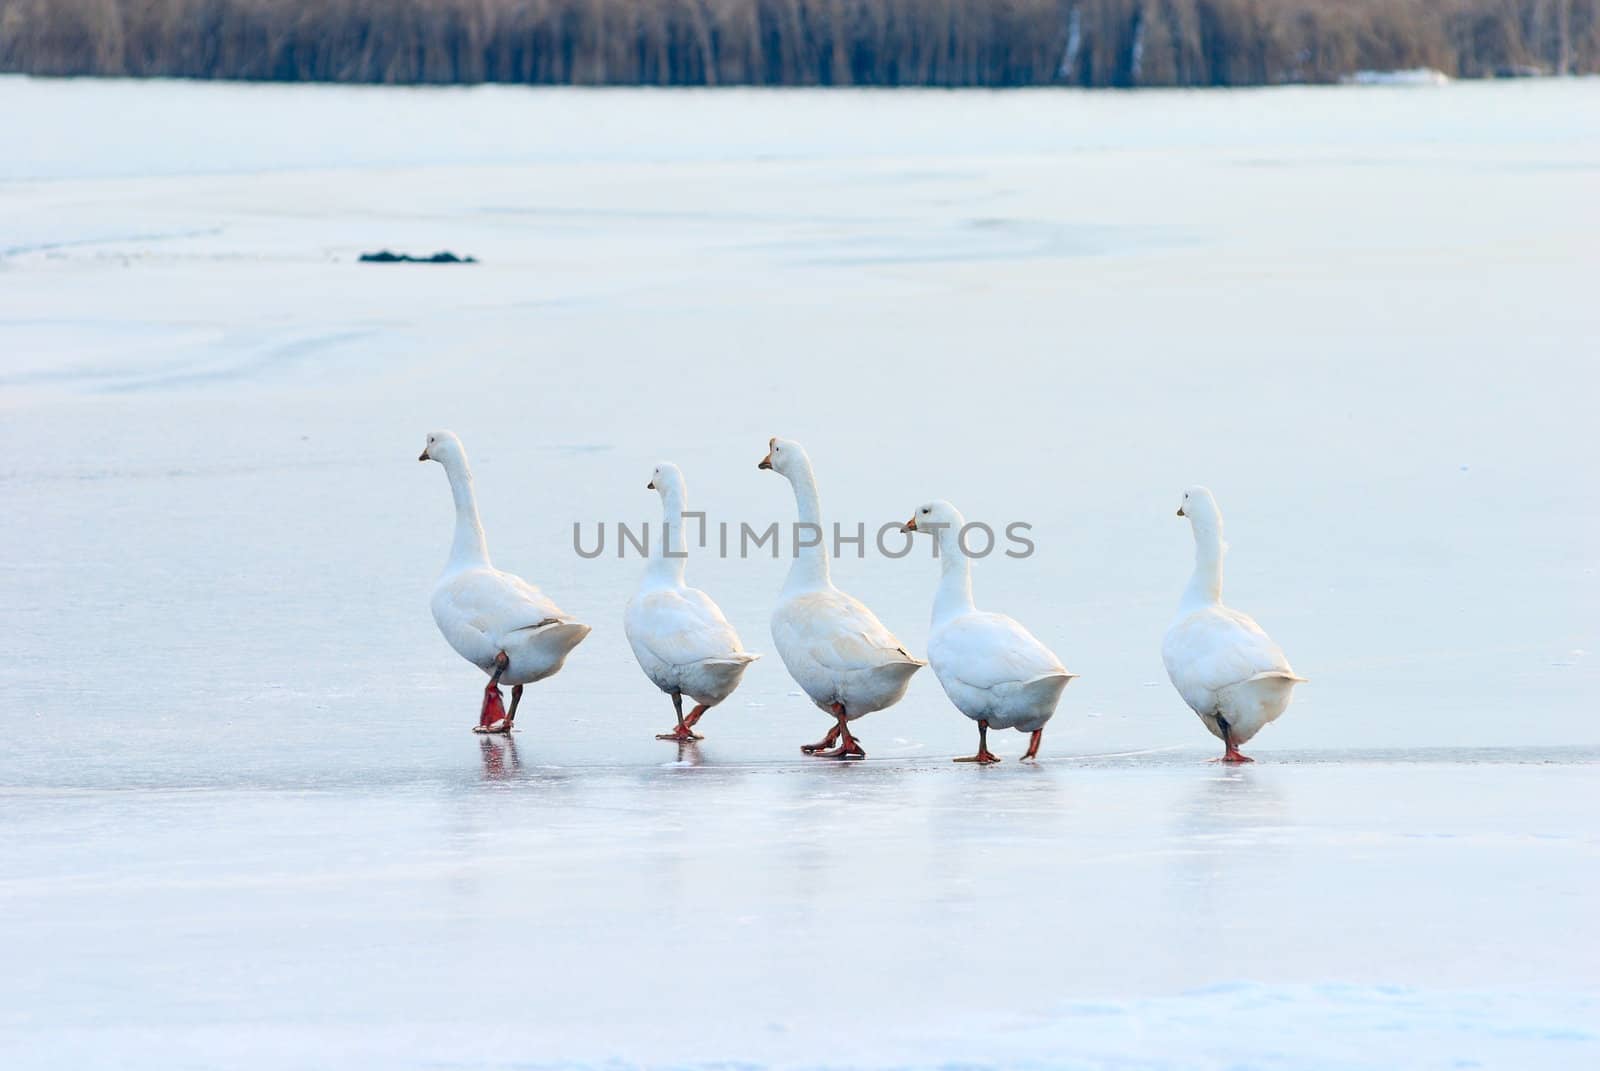 follow the leader on slippery and thin ice